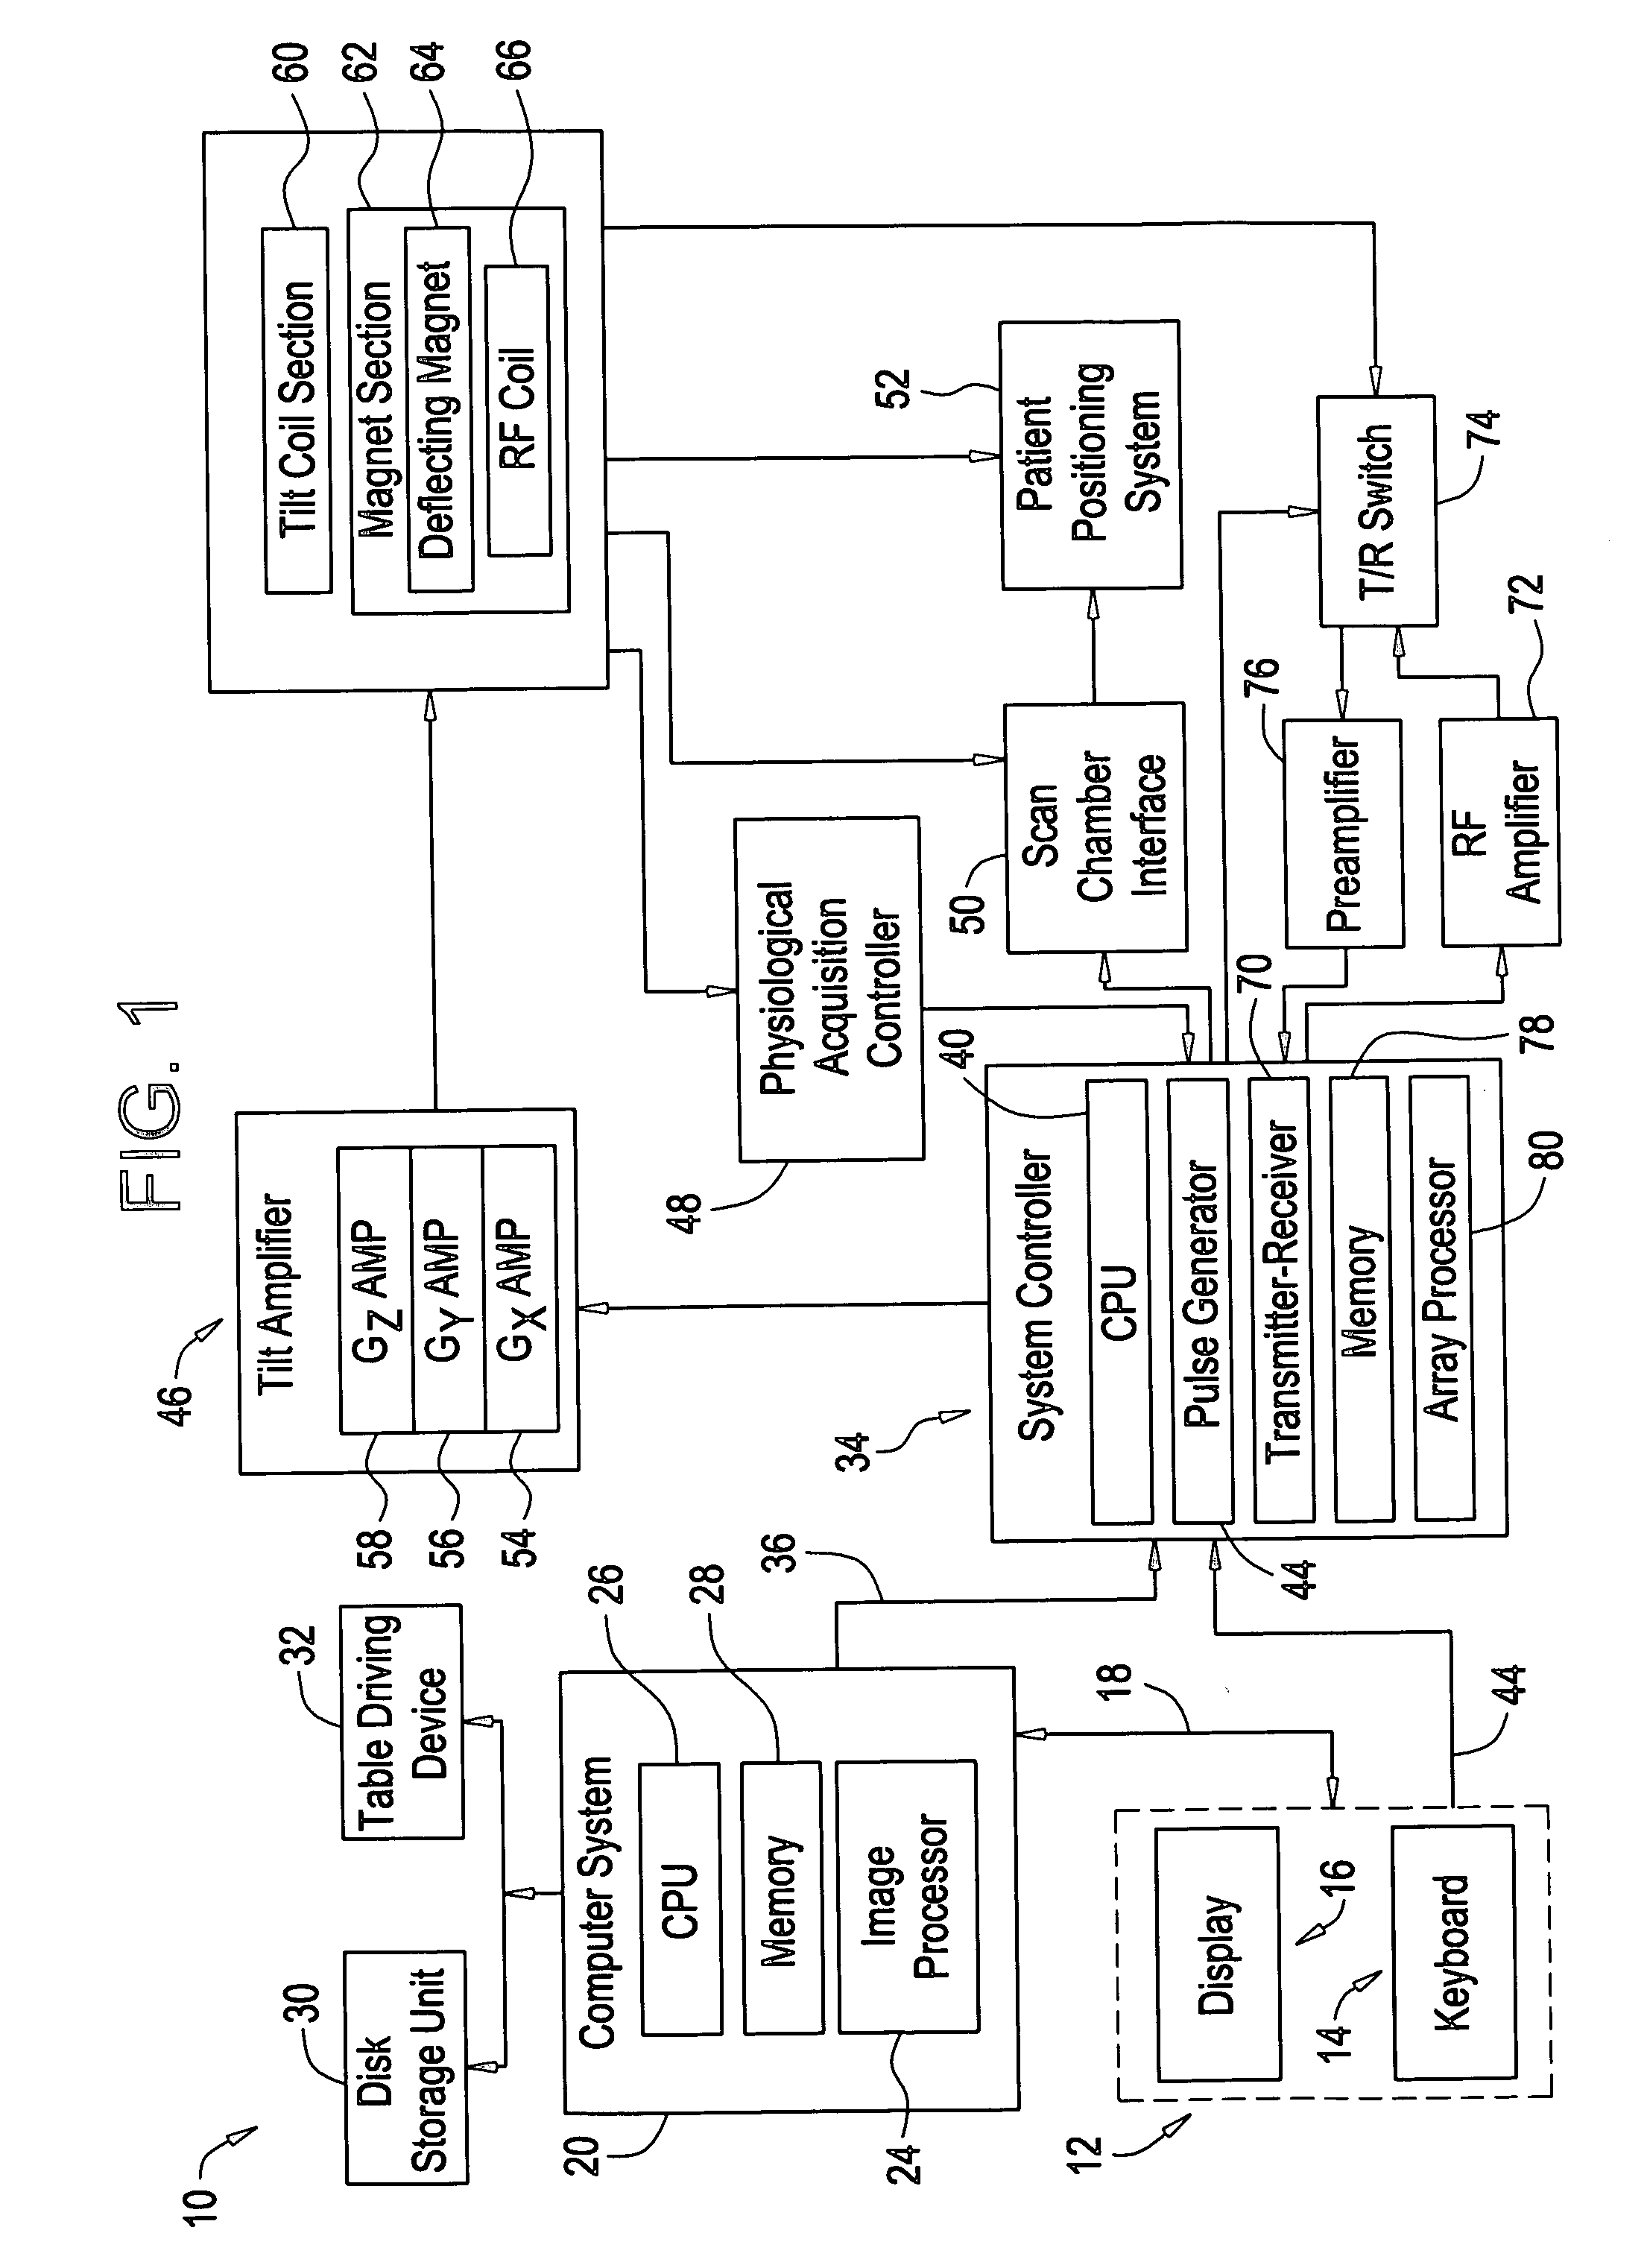 Switching device, RF coil and magnetic resonance imaging system